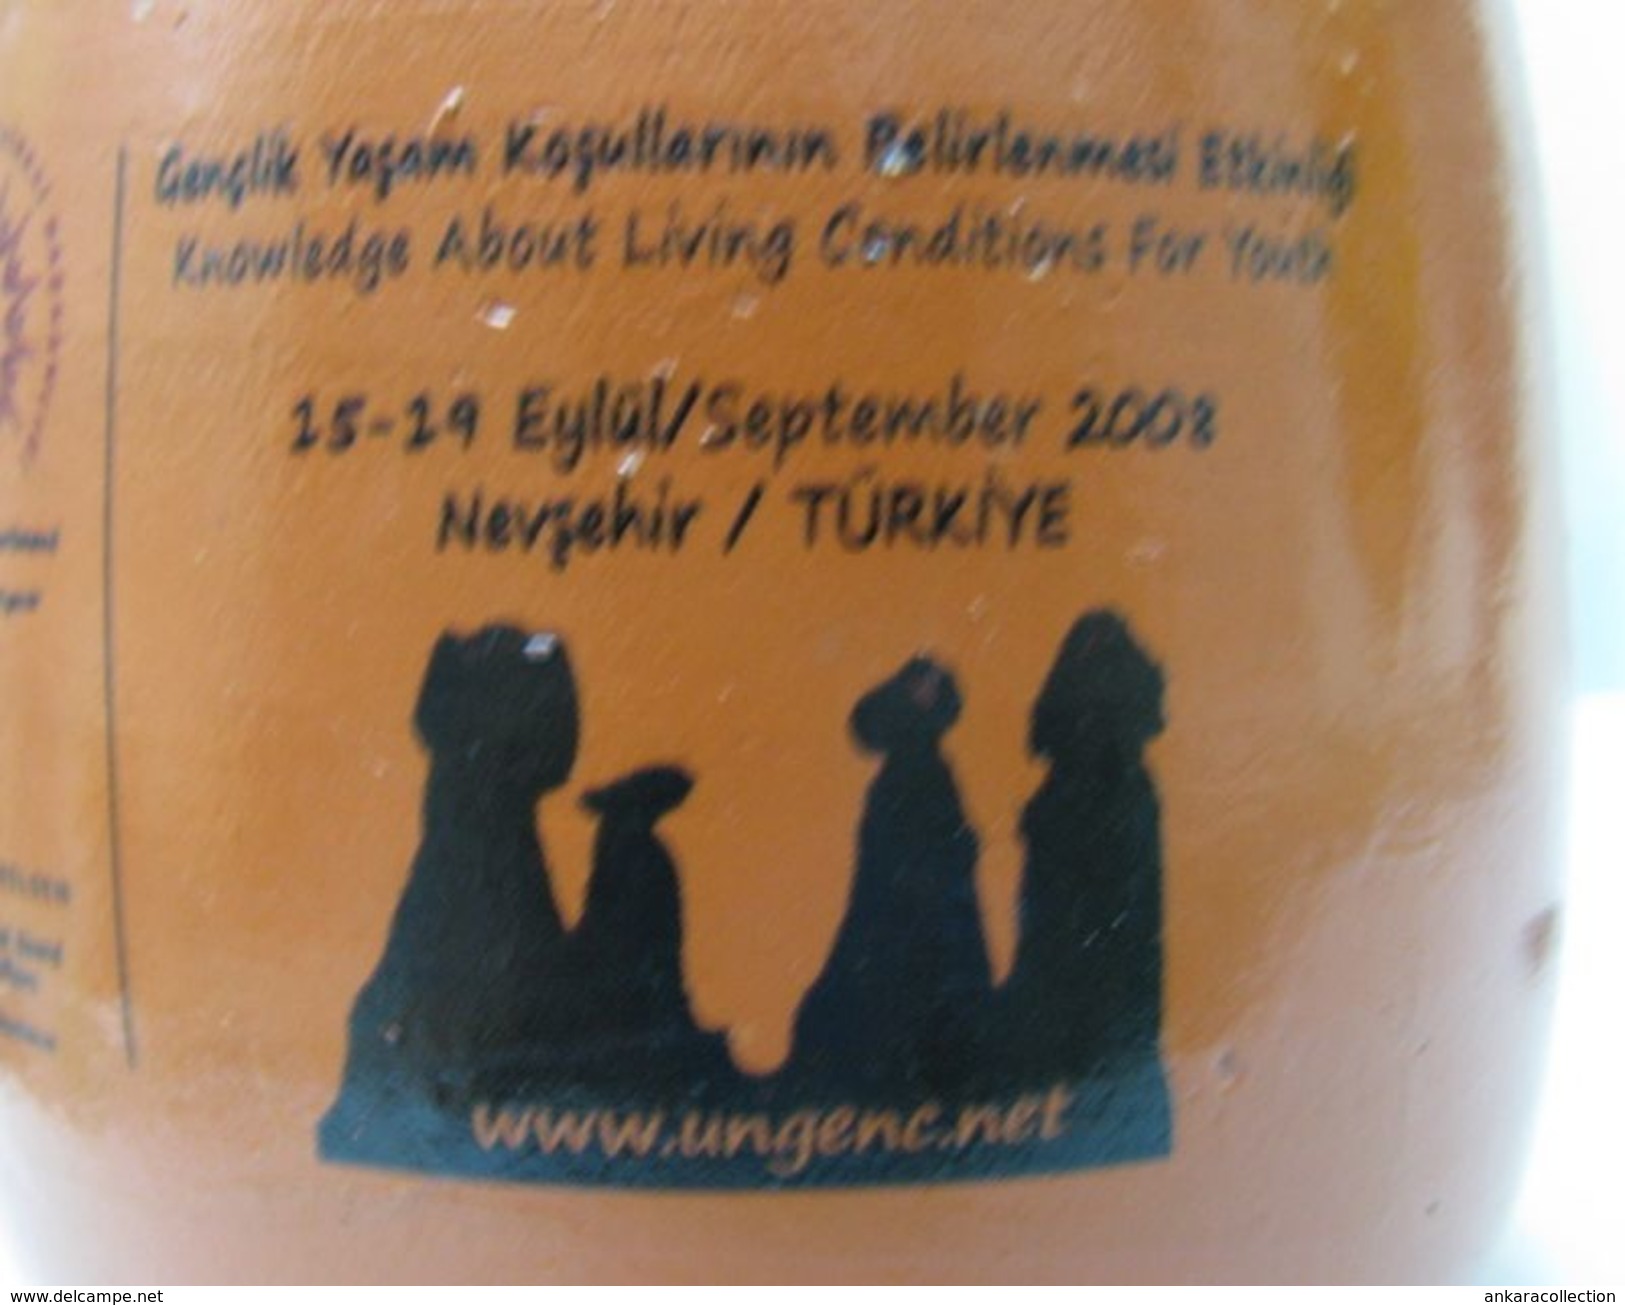 AC-  KNOWLEDGE ABOUT LIVING CONDITIONS FOR YOUTH 15 - 19 SEPTEMBER 2008 NEVSEHIR TURKEY SWEDISH NATIONAL BOARD FOR YOUTH - Tasas